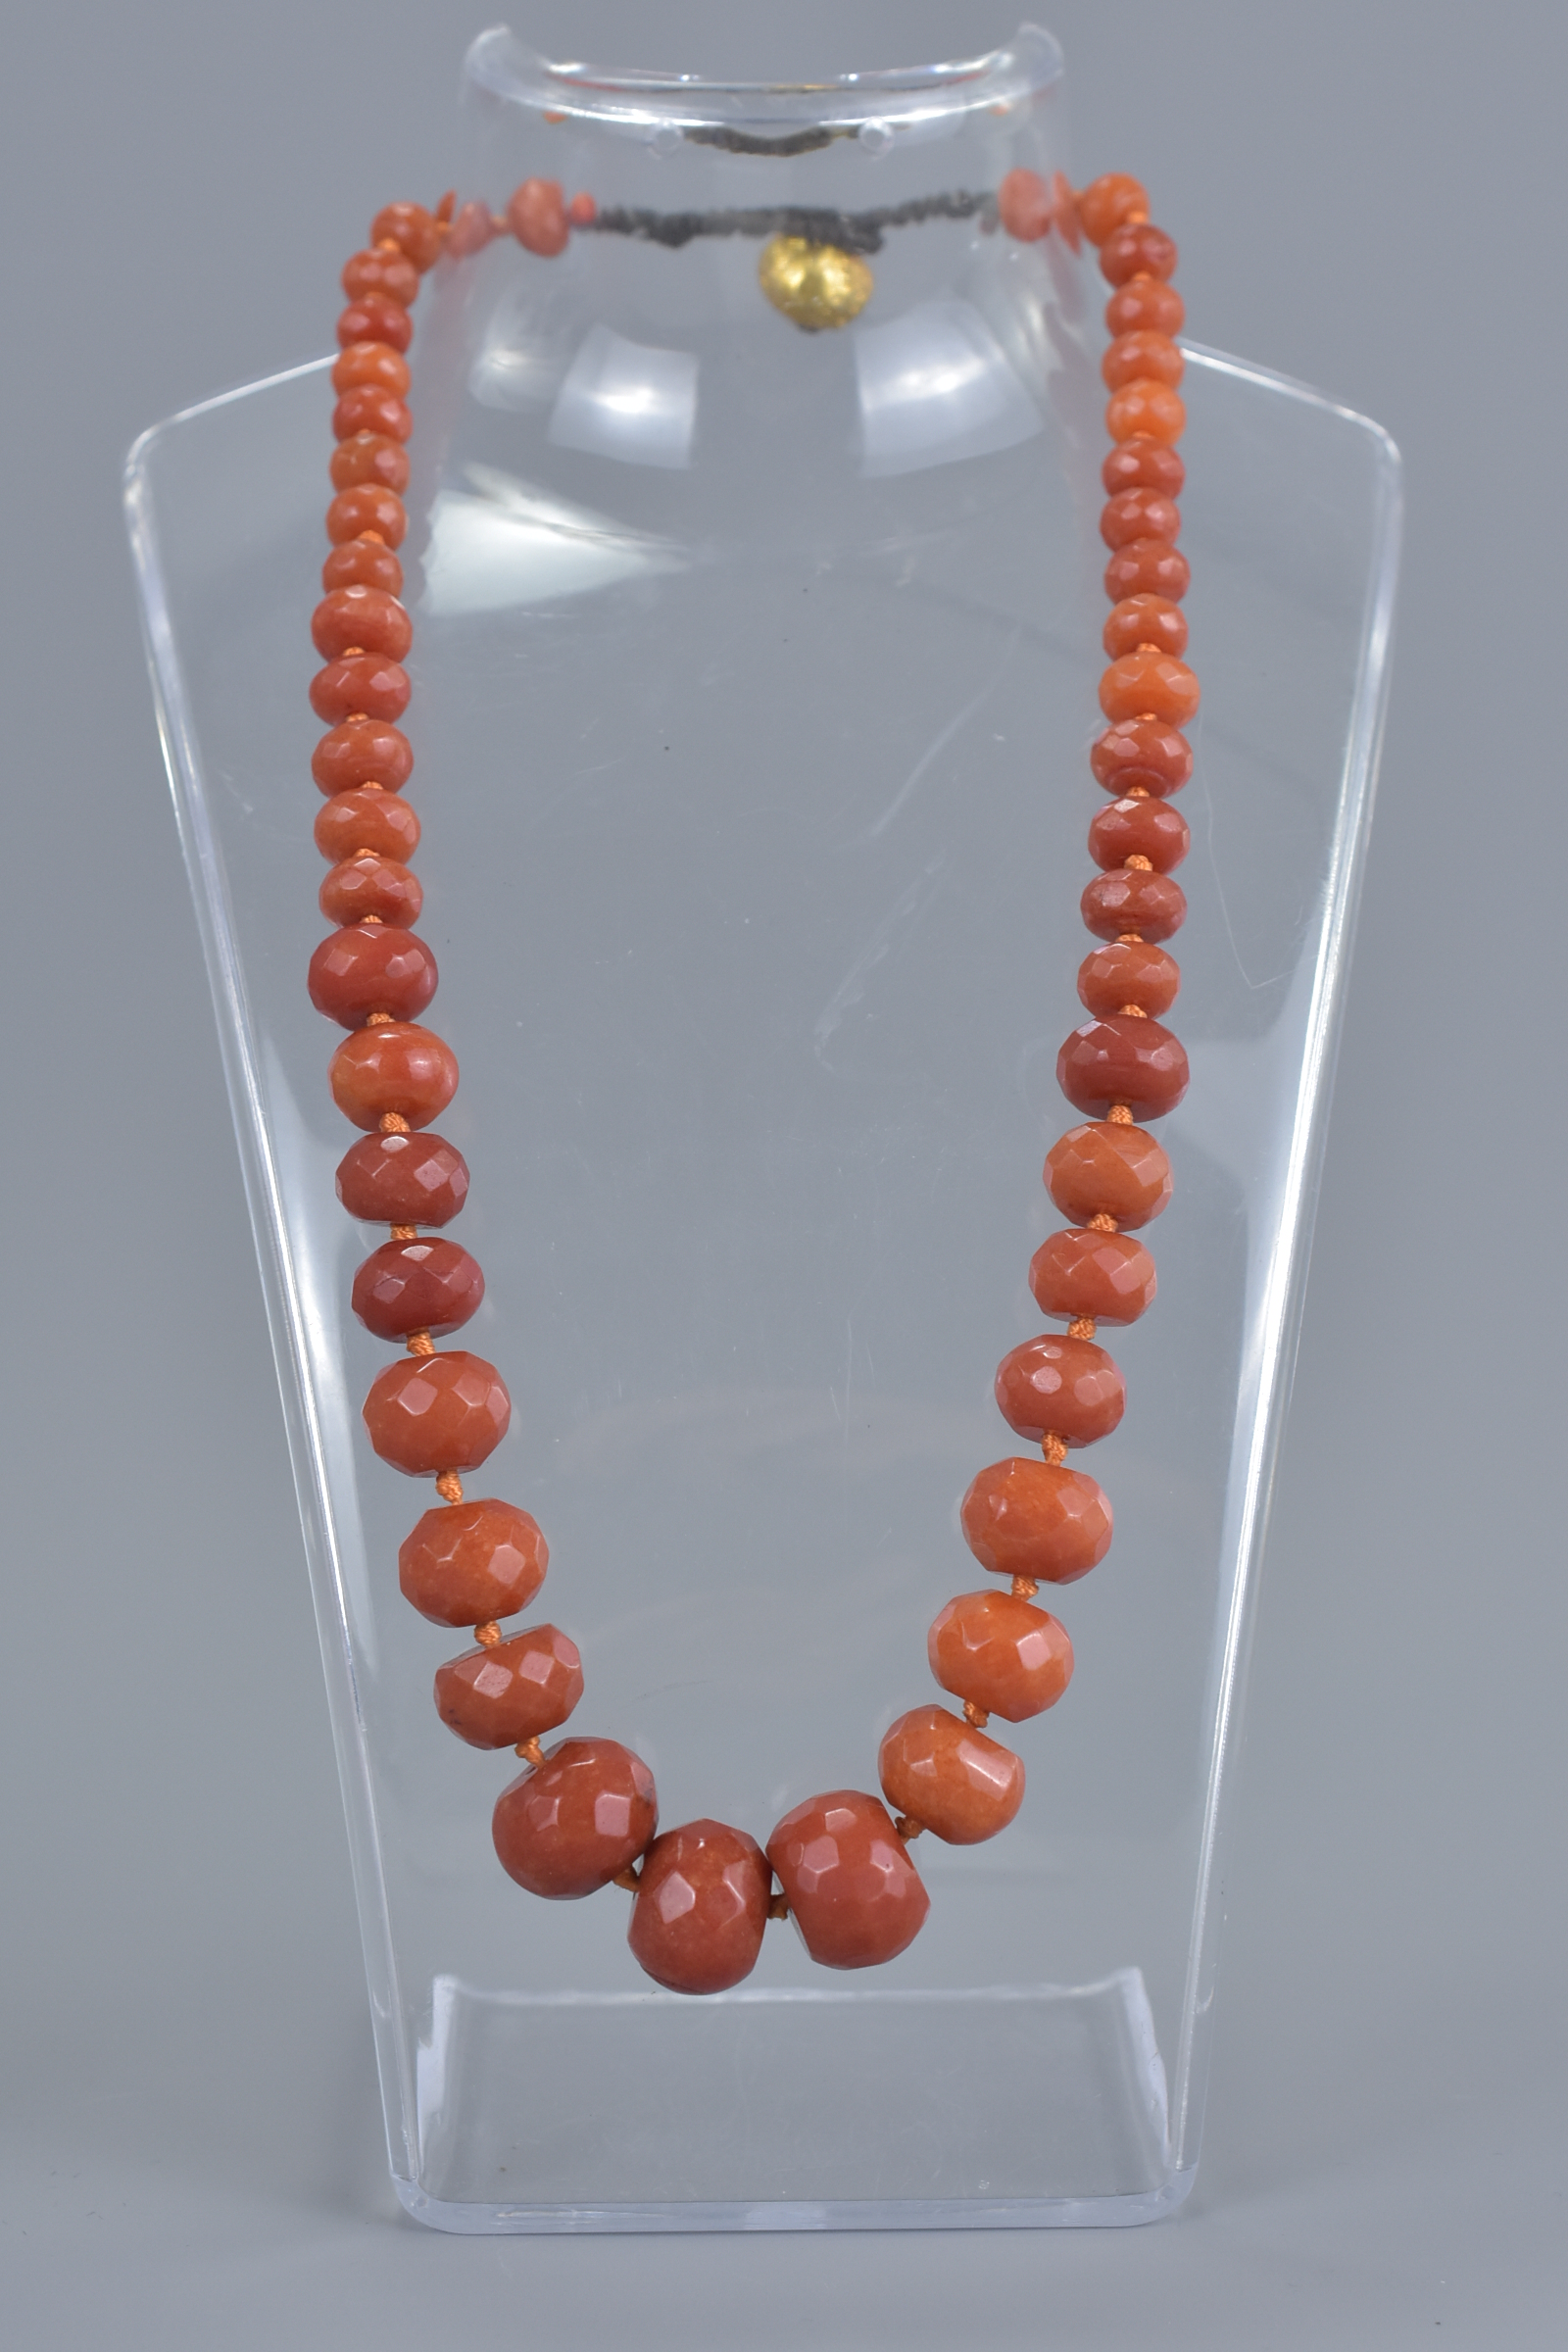 Pink Faceted Stone Necklace with Yellow Metal Spacers - Image 4 of 5